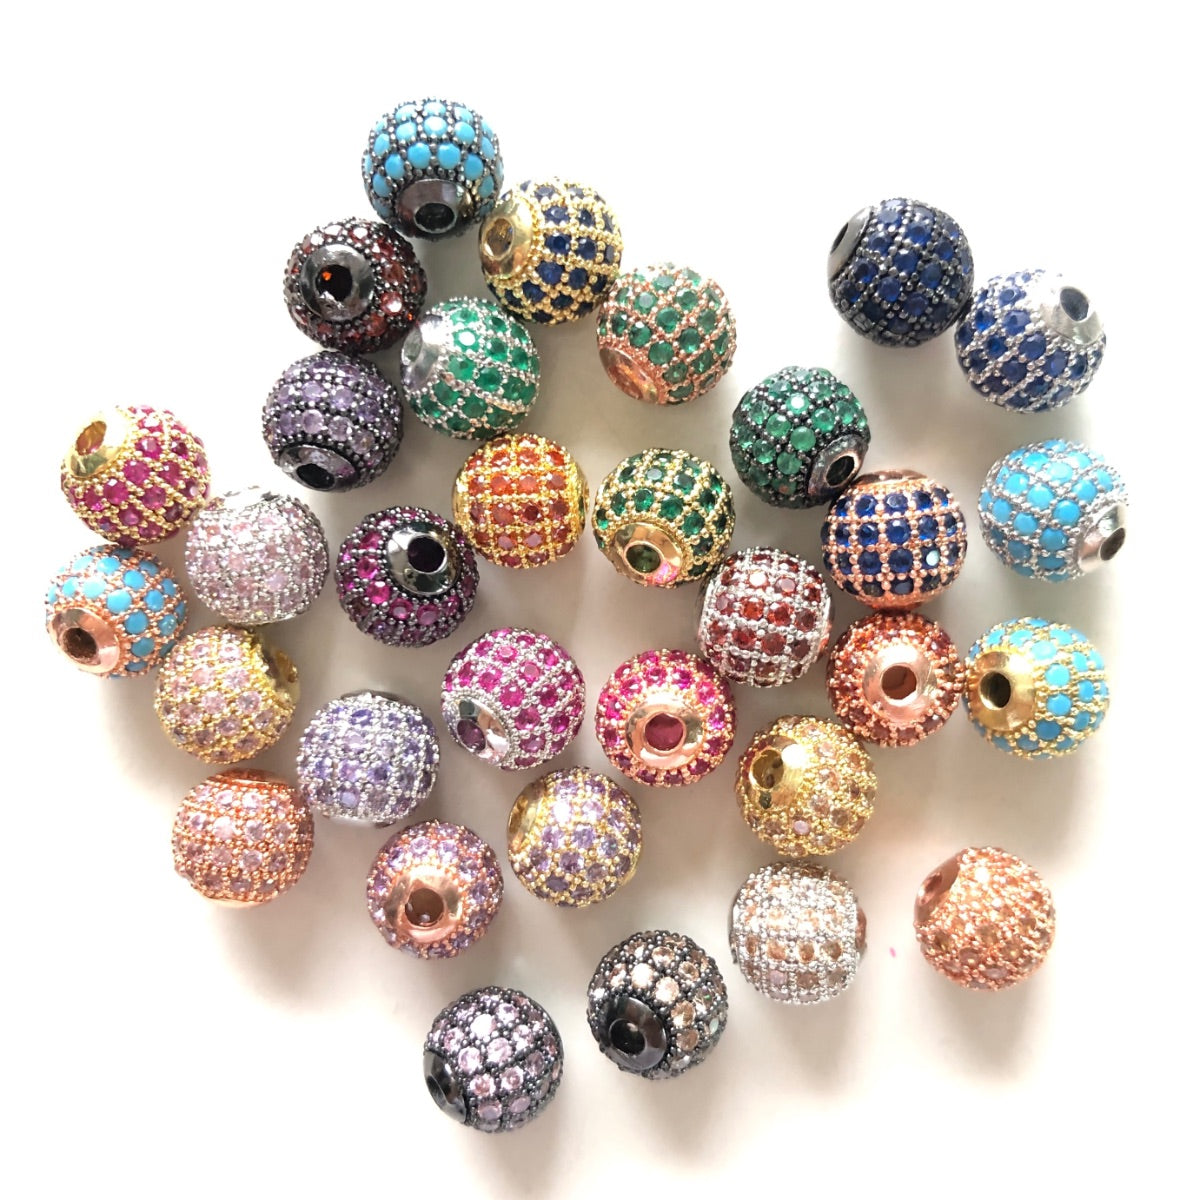 10pcs/lot 6mm, 8mm Colorful CZ Paved Ball Spacers CZ Paved Spacers 6mm Beads 8mm Beads Ball Beads Colorful Zirconia New Spacers Arrivals Charms Beads Beyond